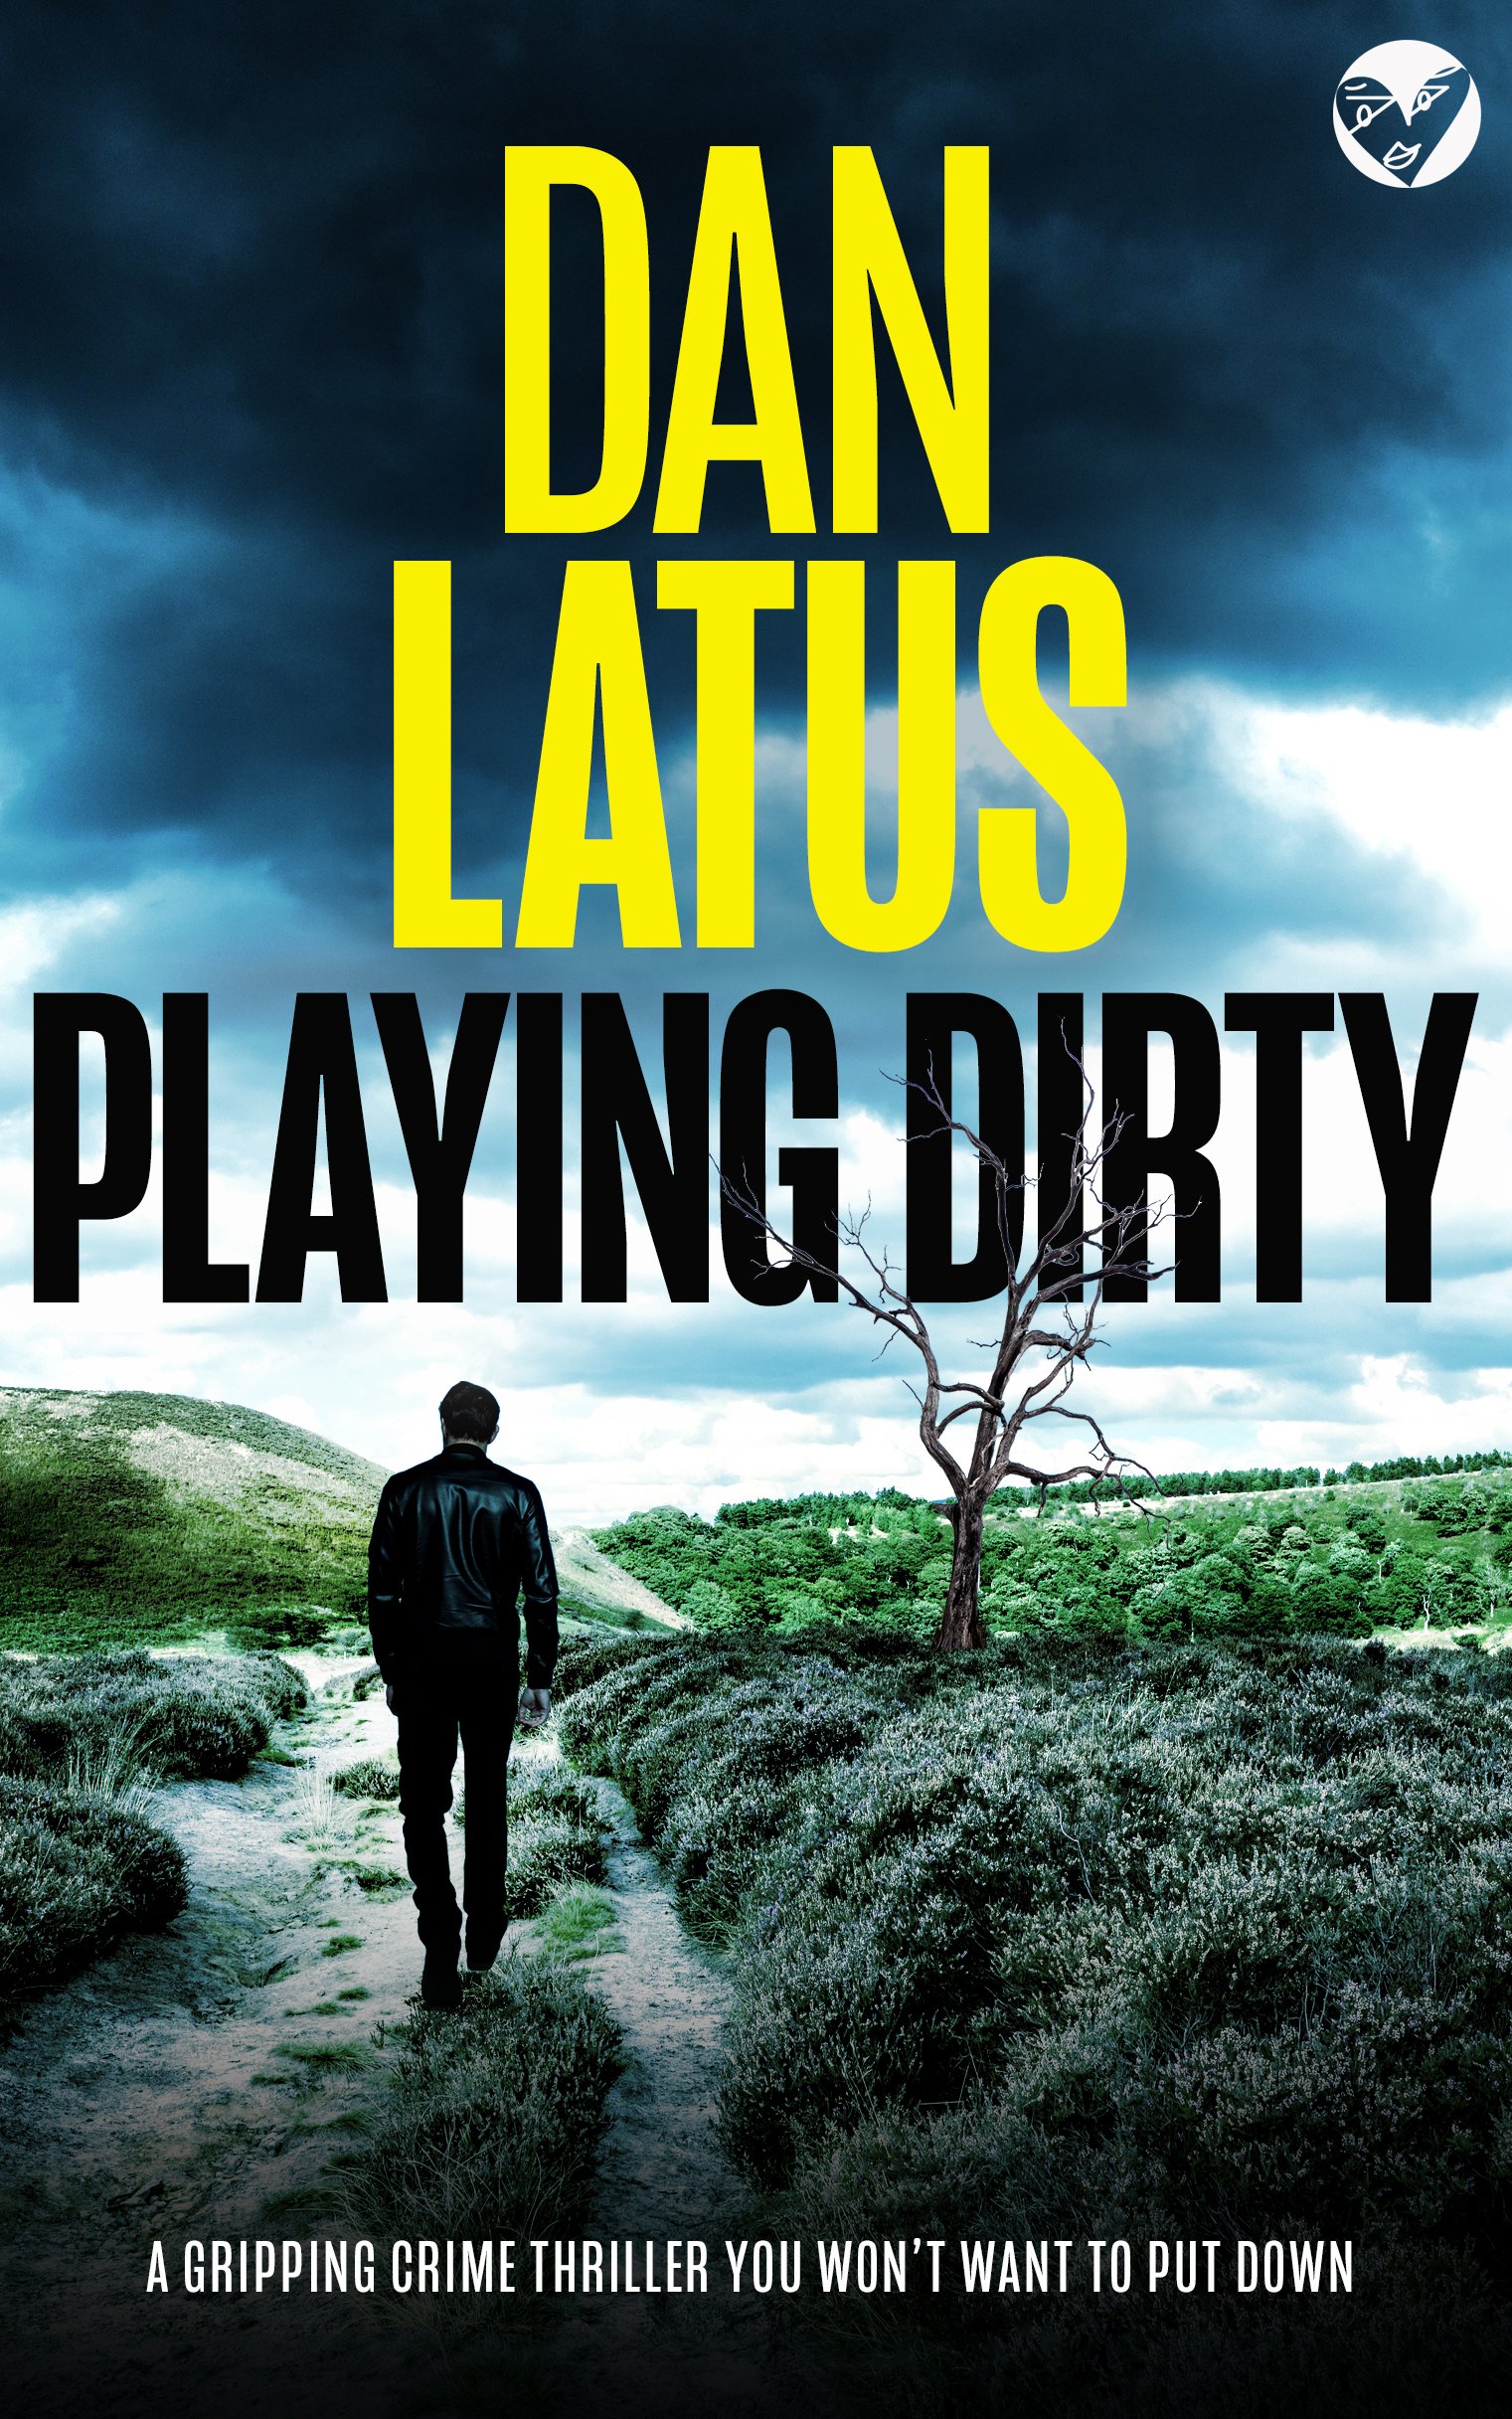 PLAYING DIRTY cover publish (2).jpg